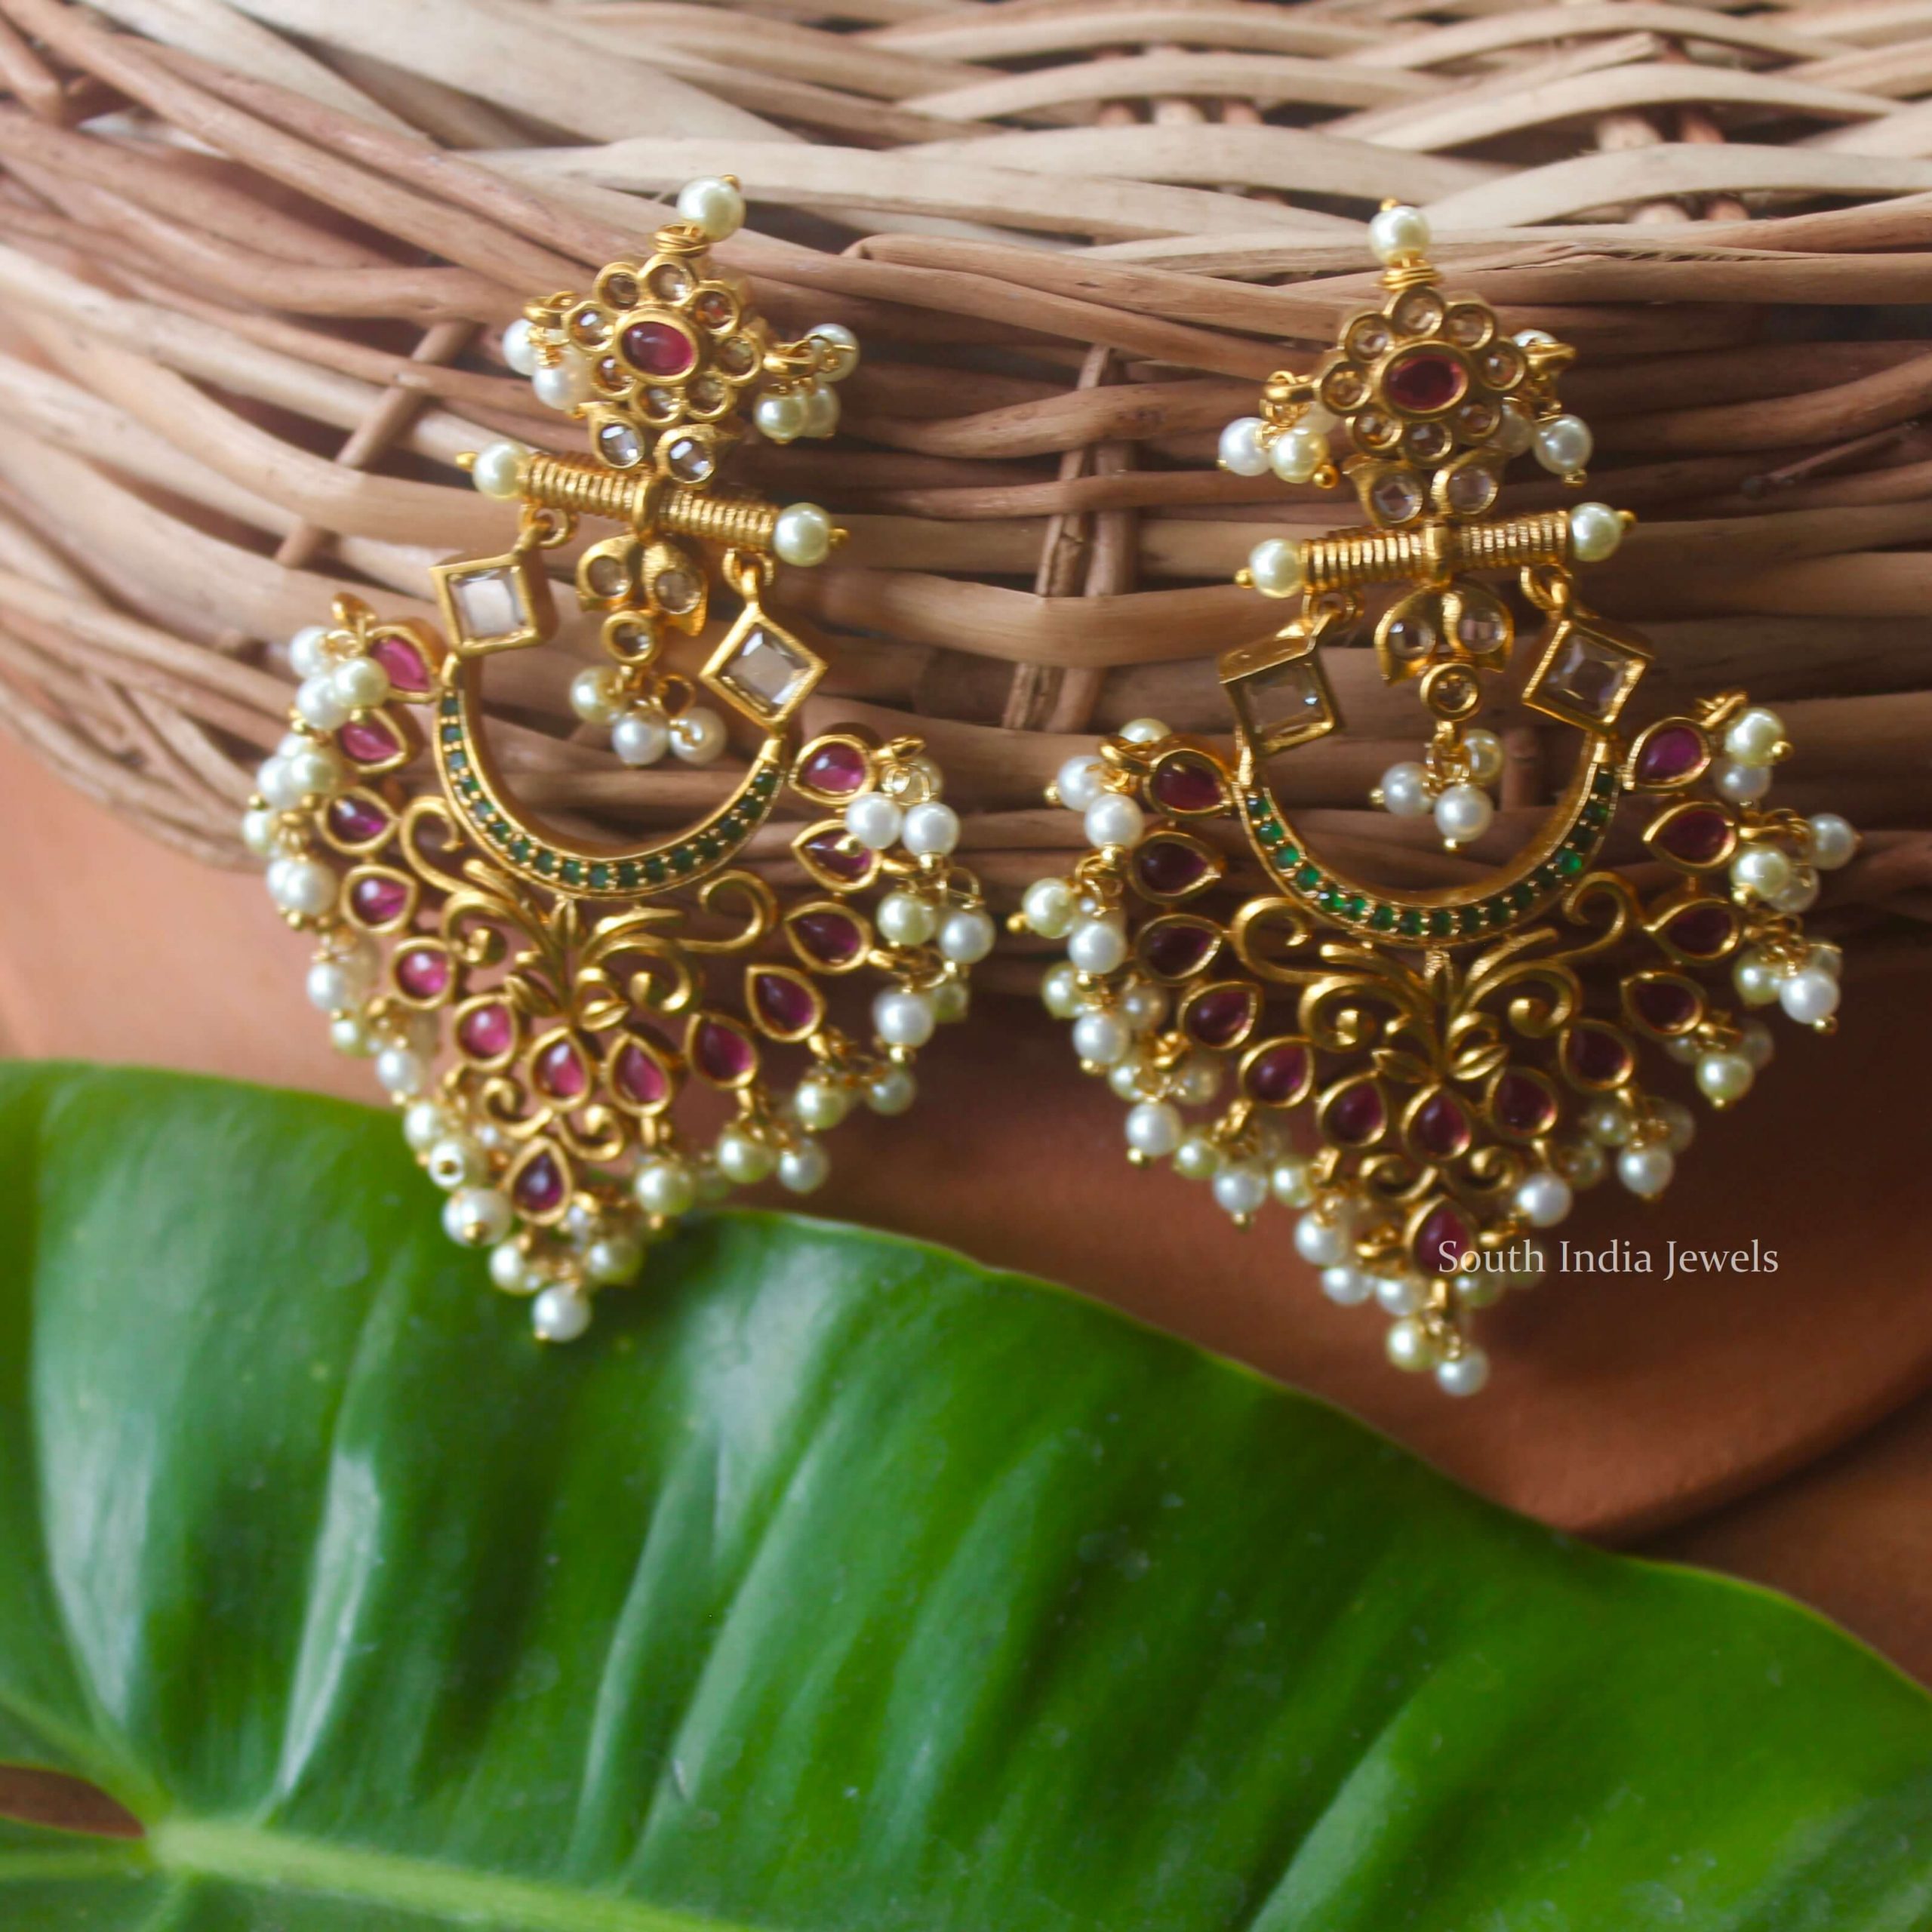 Stunning one gram gold ear hangings with guttapusalu one gram gold  jewellery 1 gm gold earrings